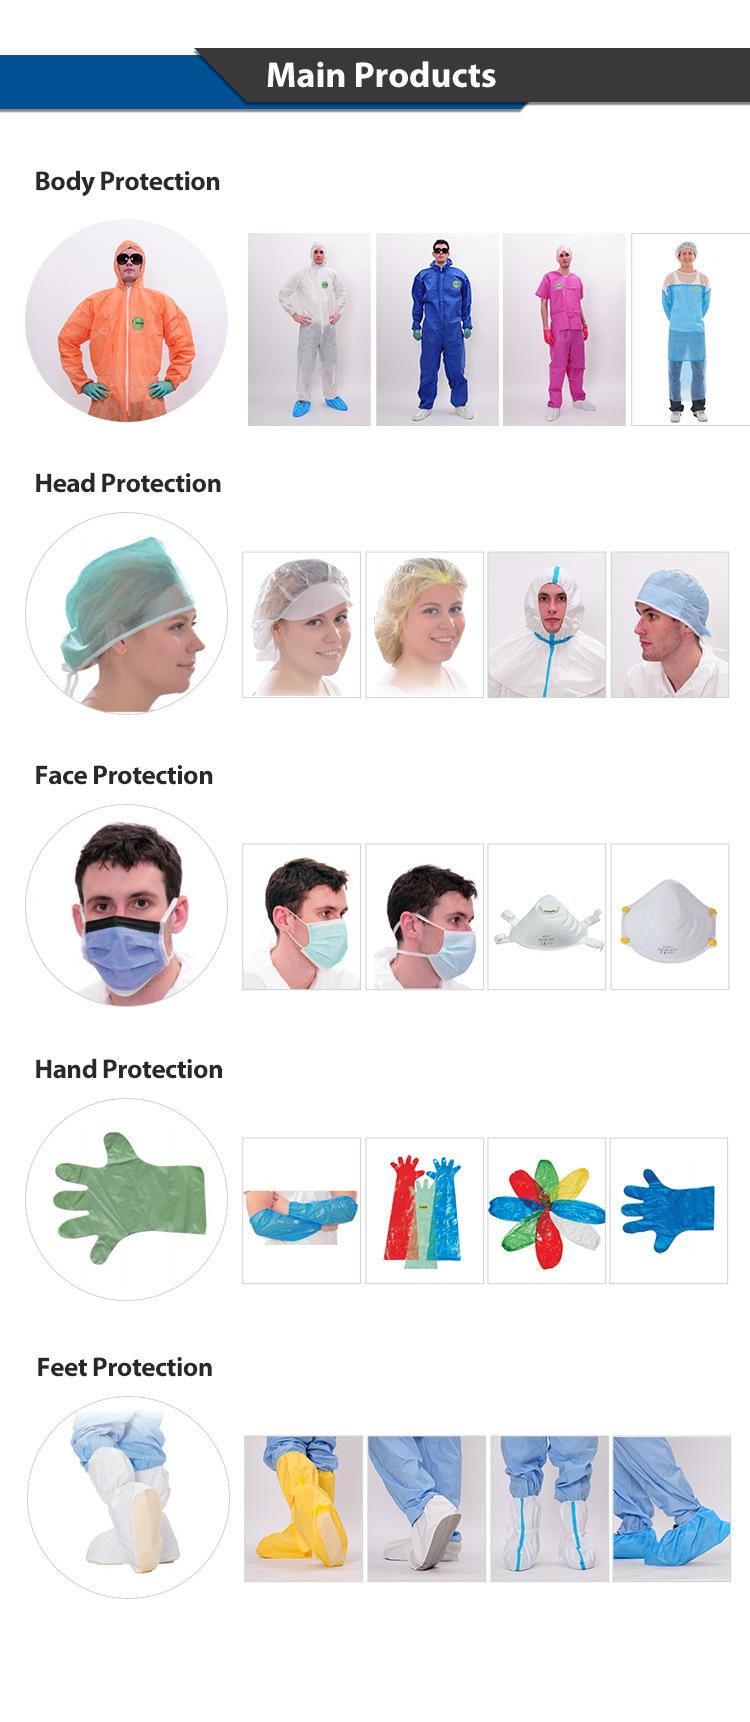 High Filtration Barrier Against Bacteria Breathable Disposable Anti Virus 3 Ply Face Mask in Stock